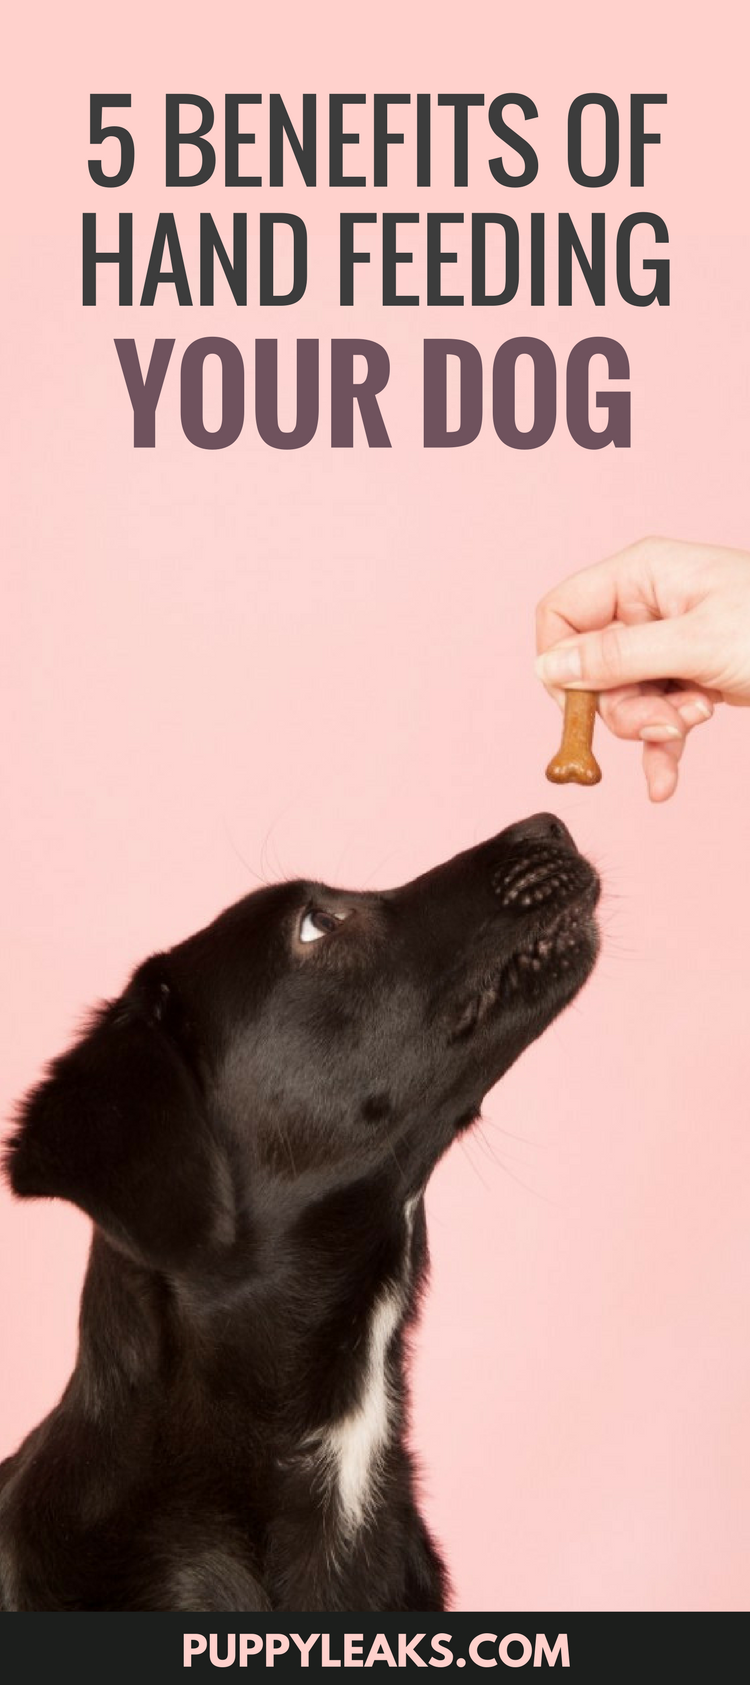 Looking for an easy way to teach your dog good manners, boost their confidence and strengthen your bond? Try feeding your dog by hand. Here's 5 benefits of hand feeding your dog. 